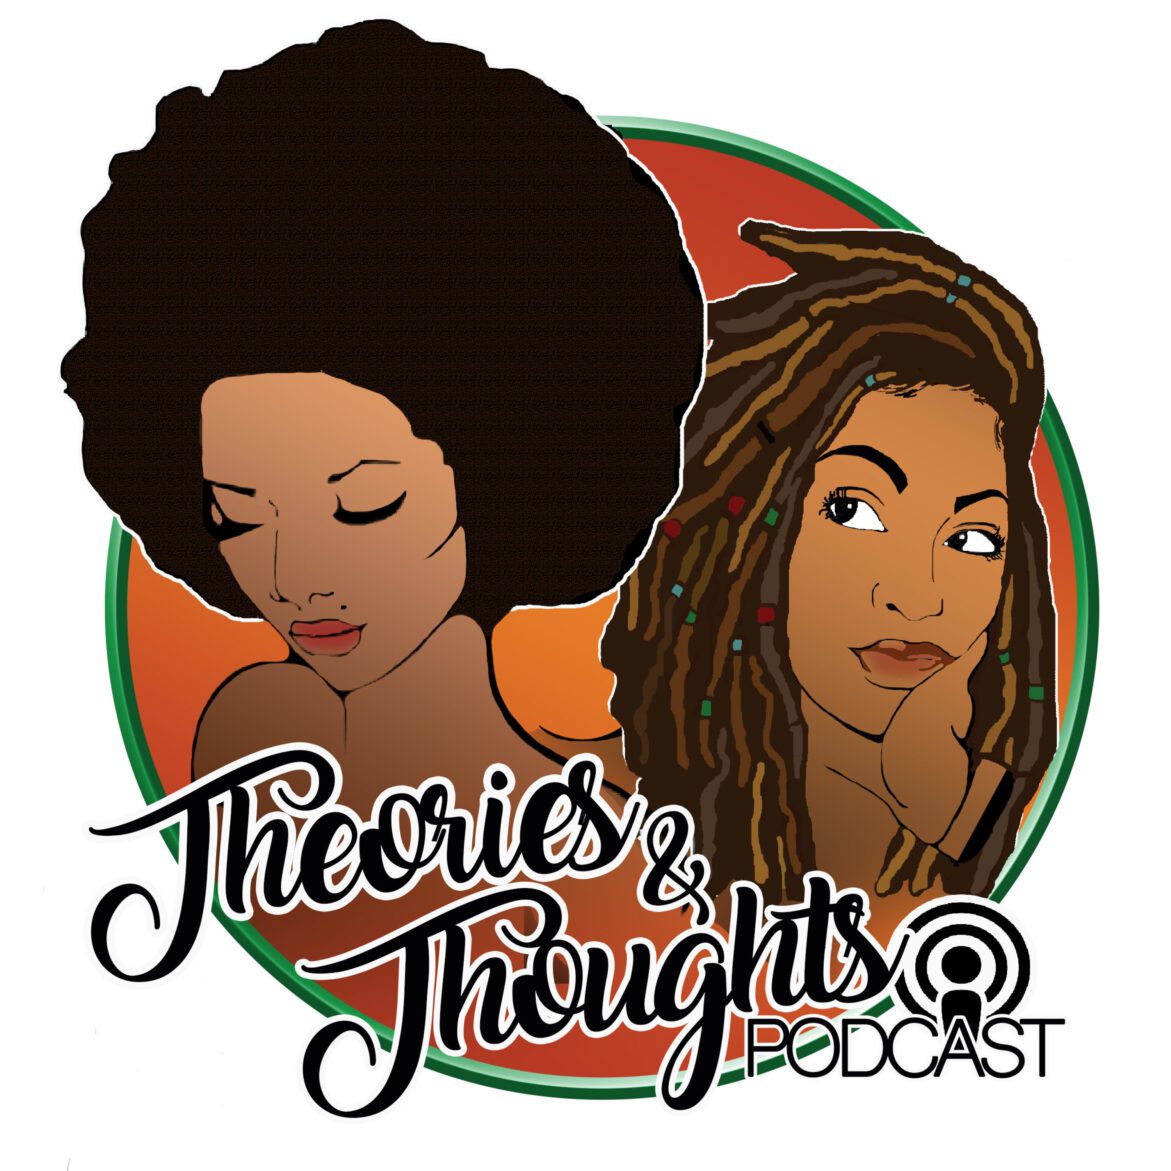 Black Podcasting - Theories & Thoughts: Episode 55- Single Life, Finding Your True Identity w/ Reka Robinson